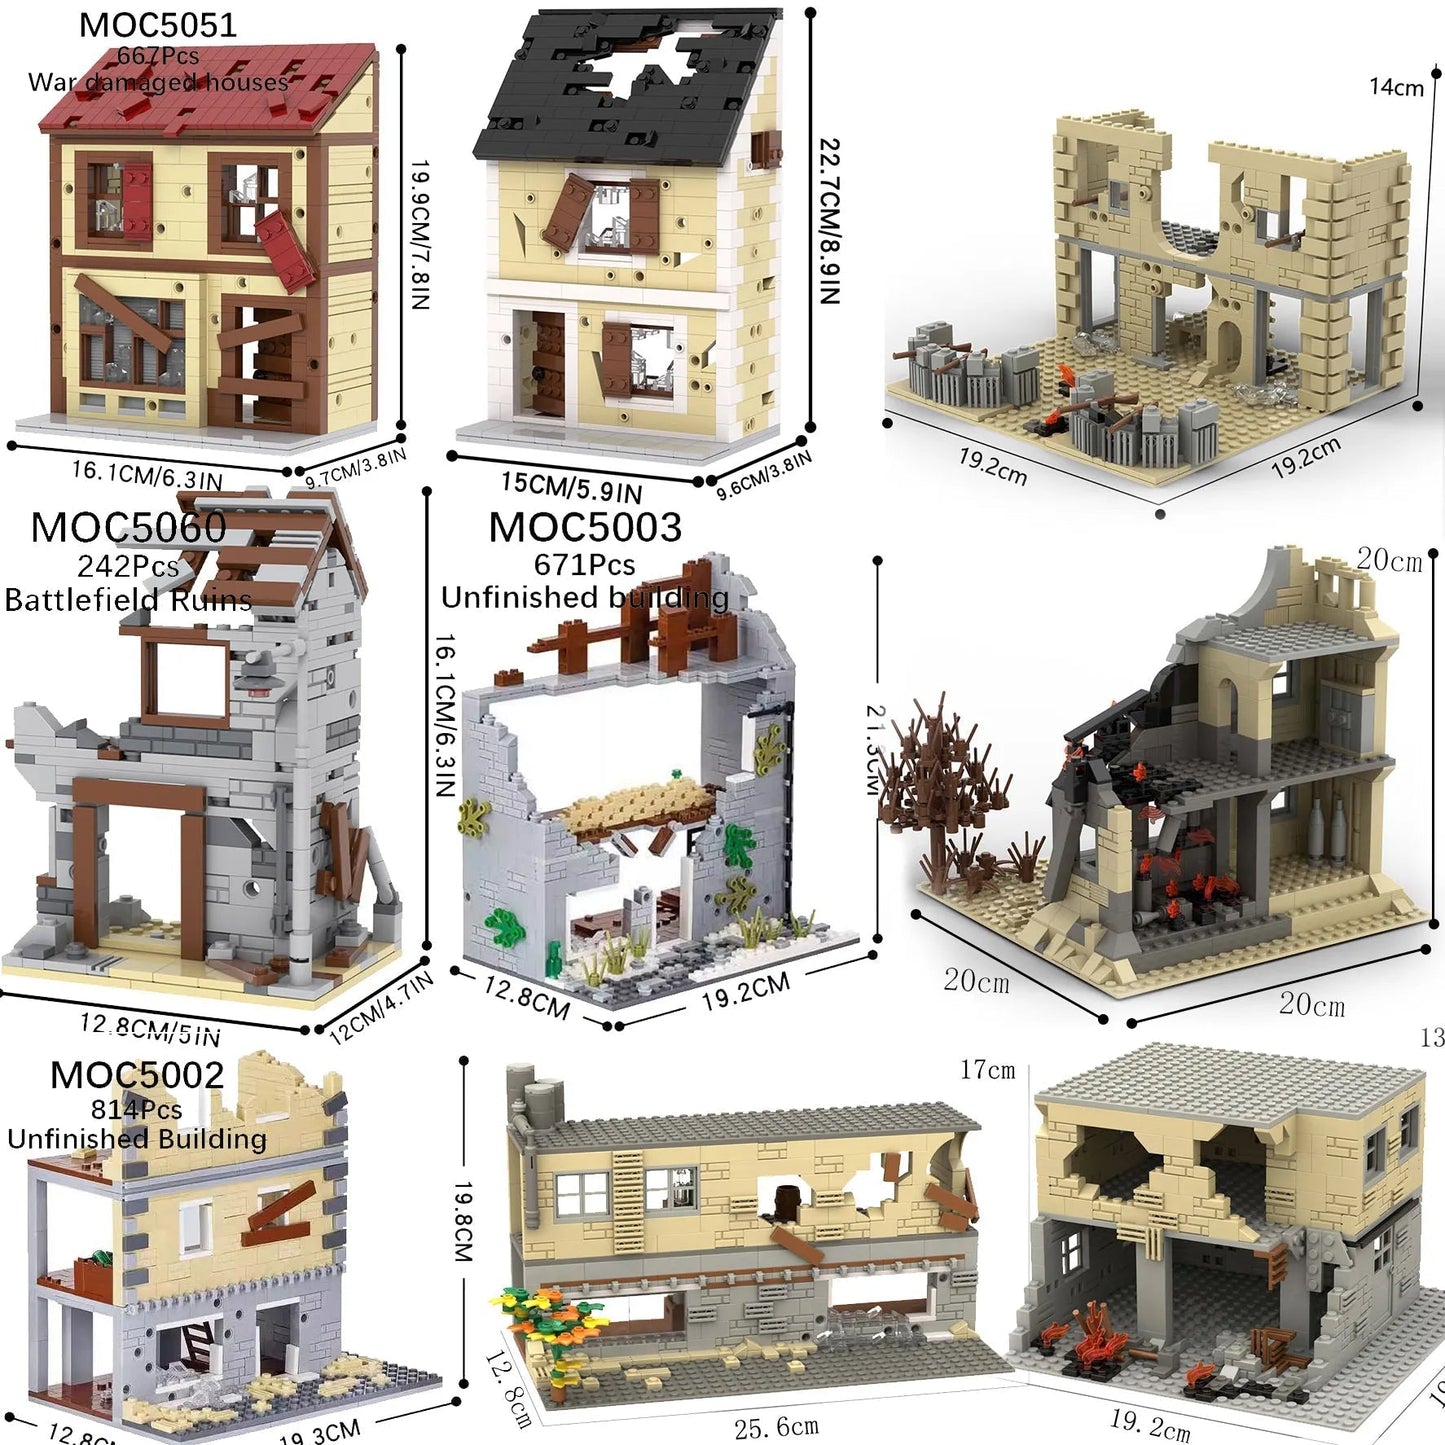 MOC5052 WWII Destroyed Townhouse Ruins Building Blocks Model Ziggy's Pop Toy Shoppe